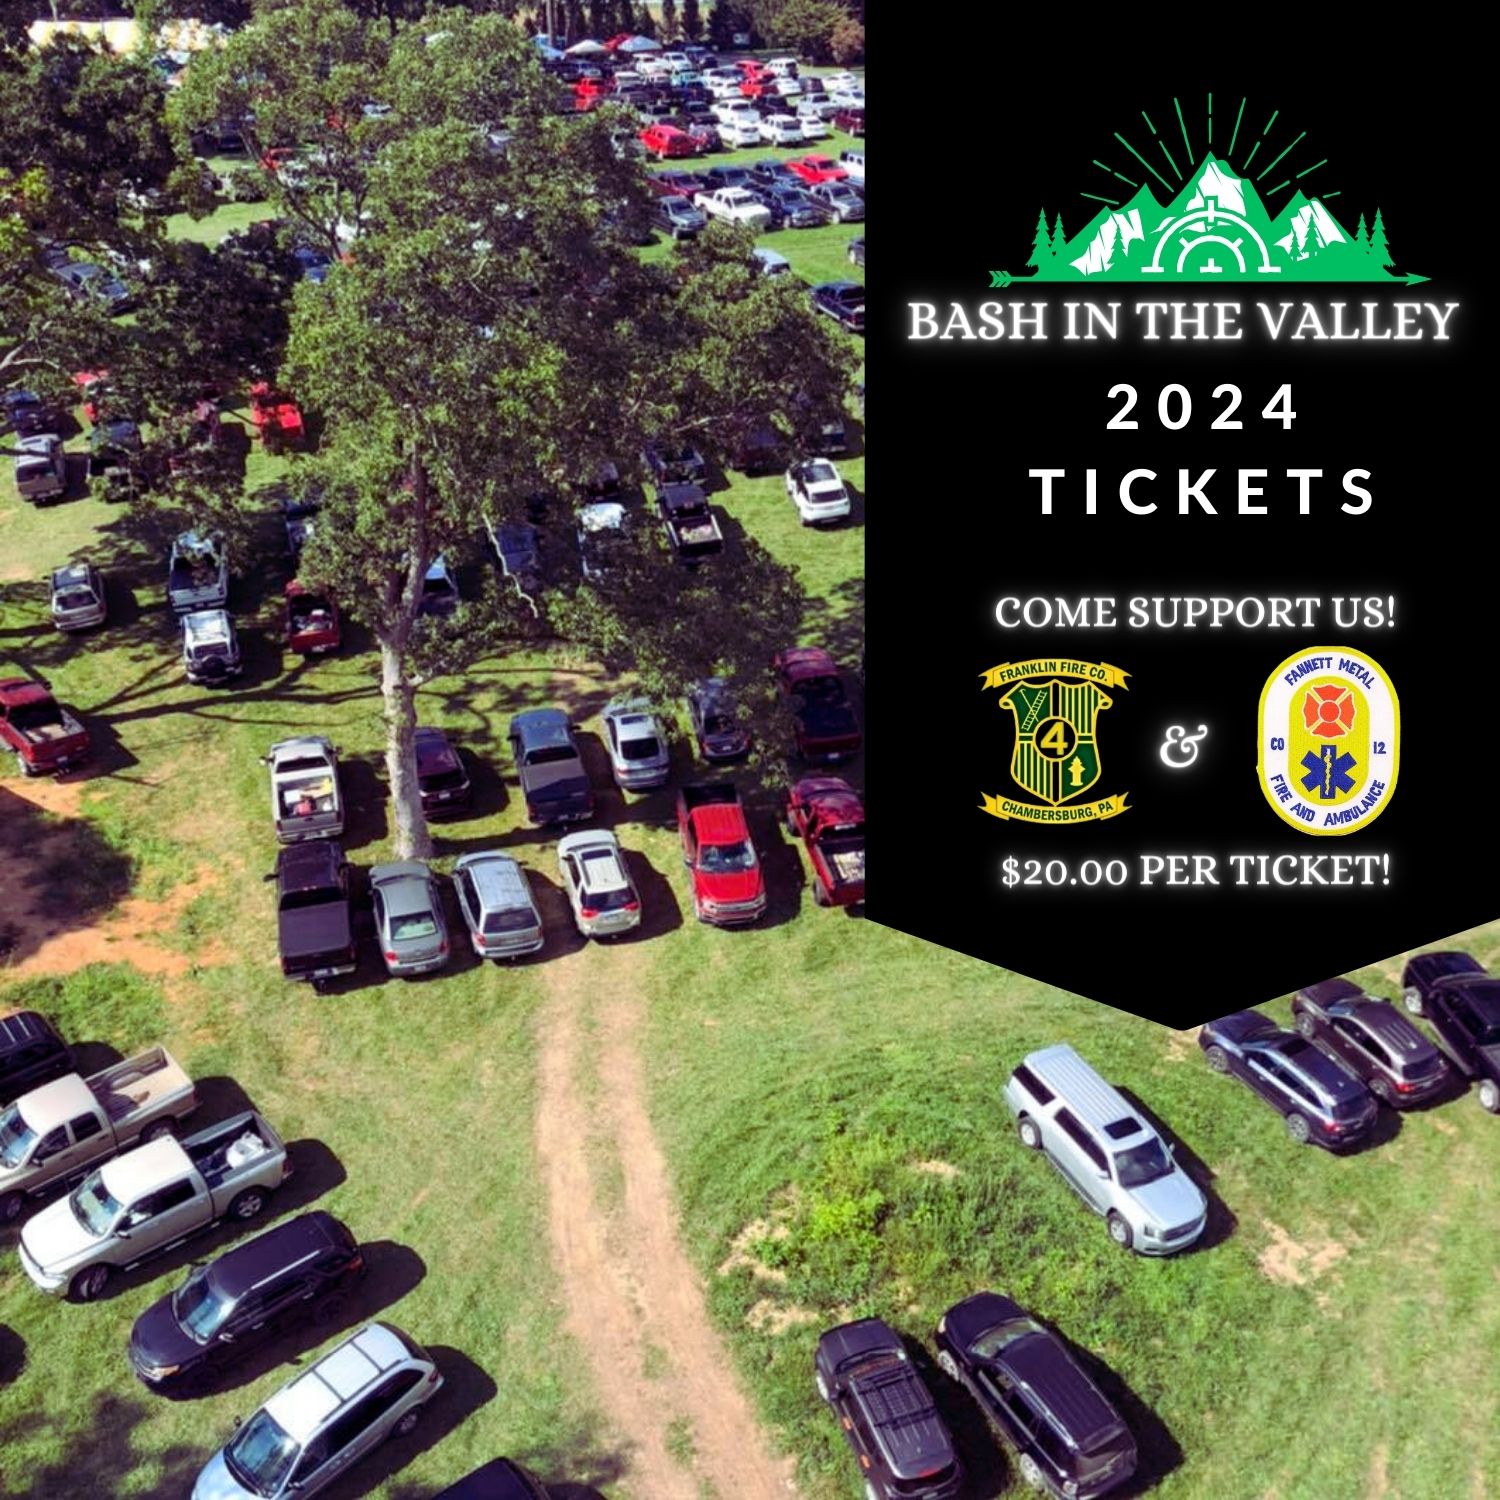 BASH IN THE VALLEY-2024 TICKET